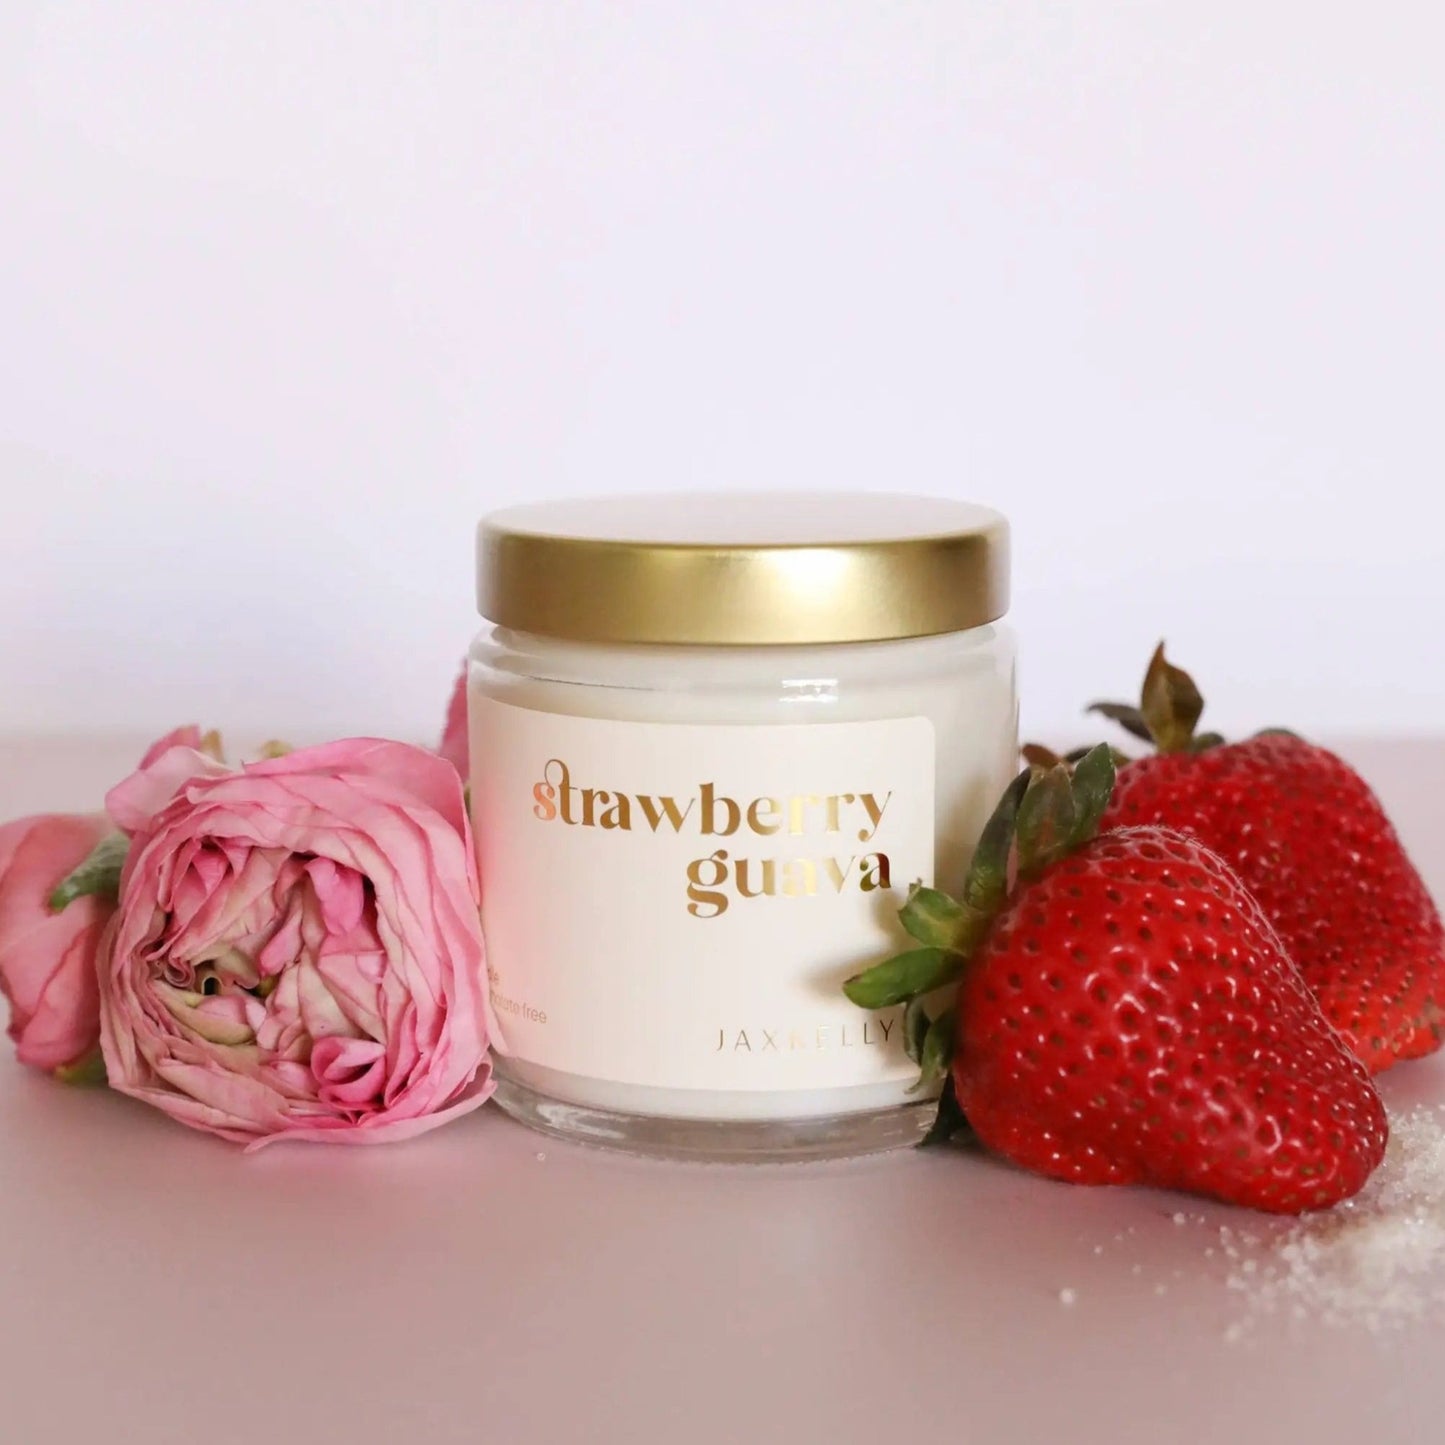 Strawberry Guava Summer Scented Candle In glass jar 